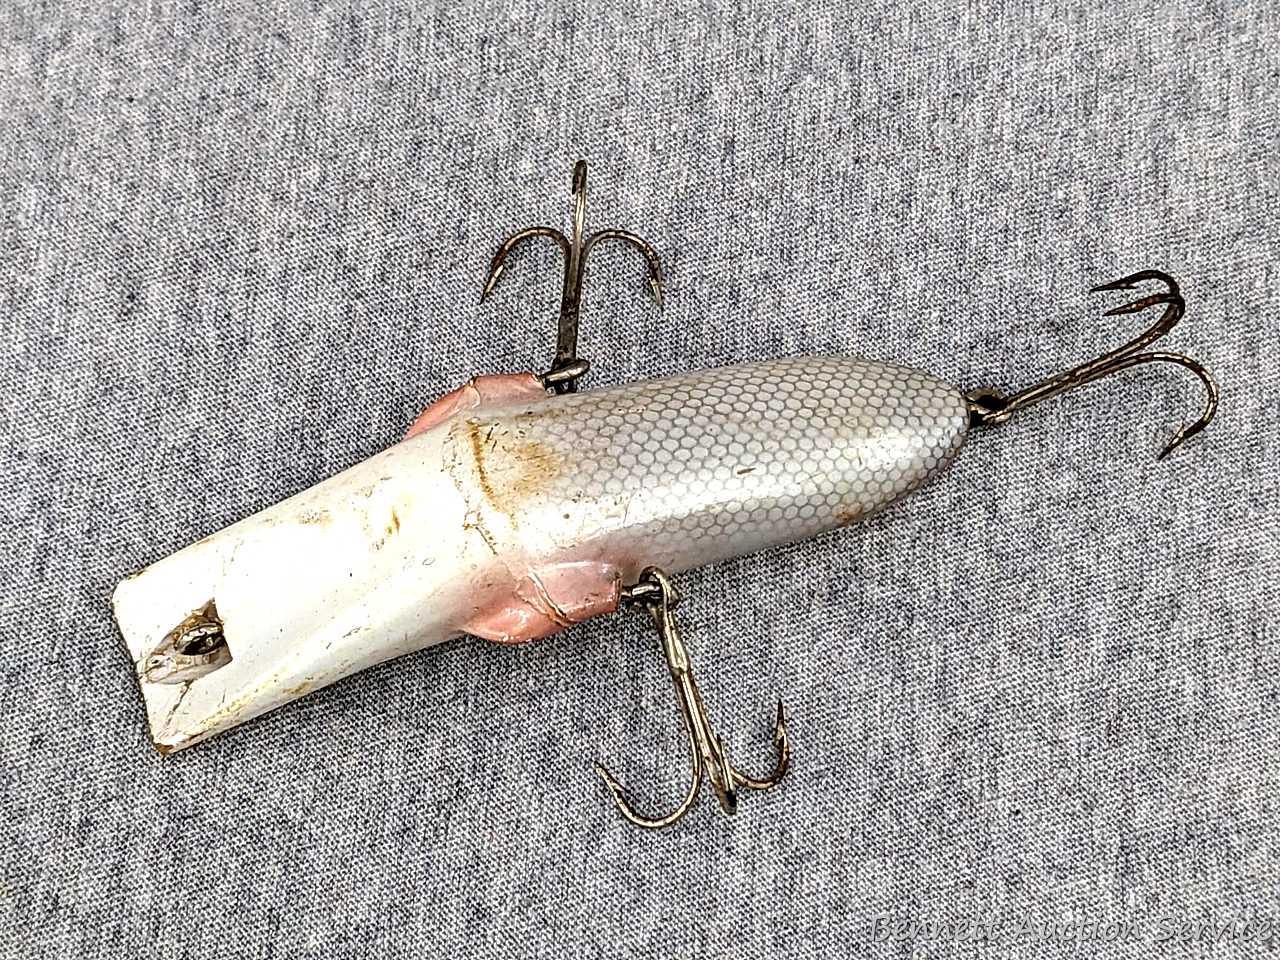 Vintage Mercury Minnow fishing lure is about 4